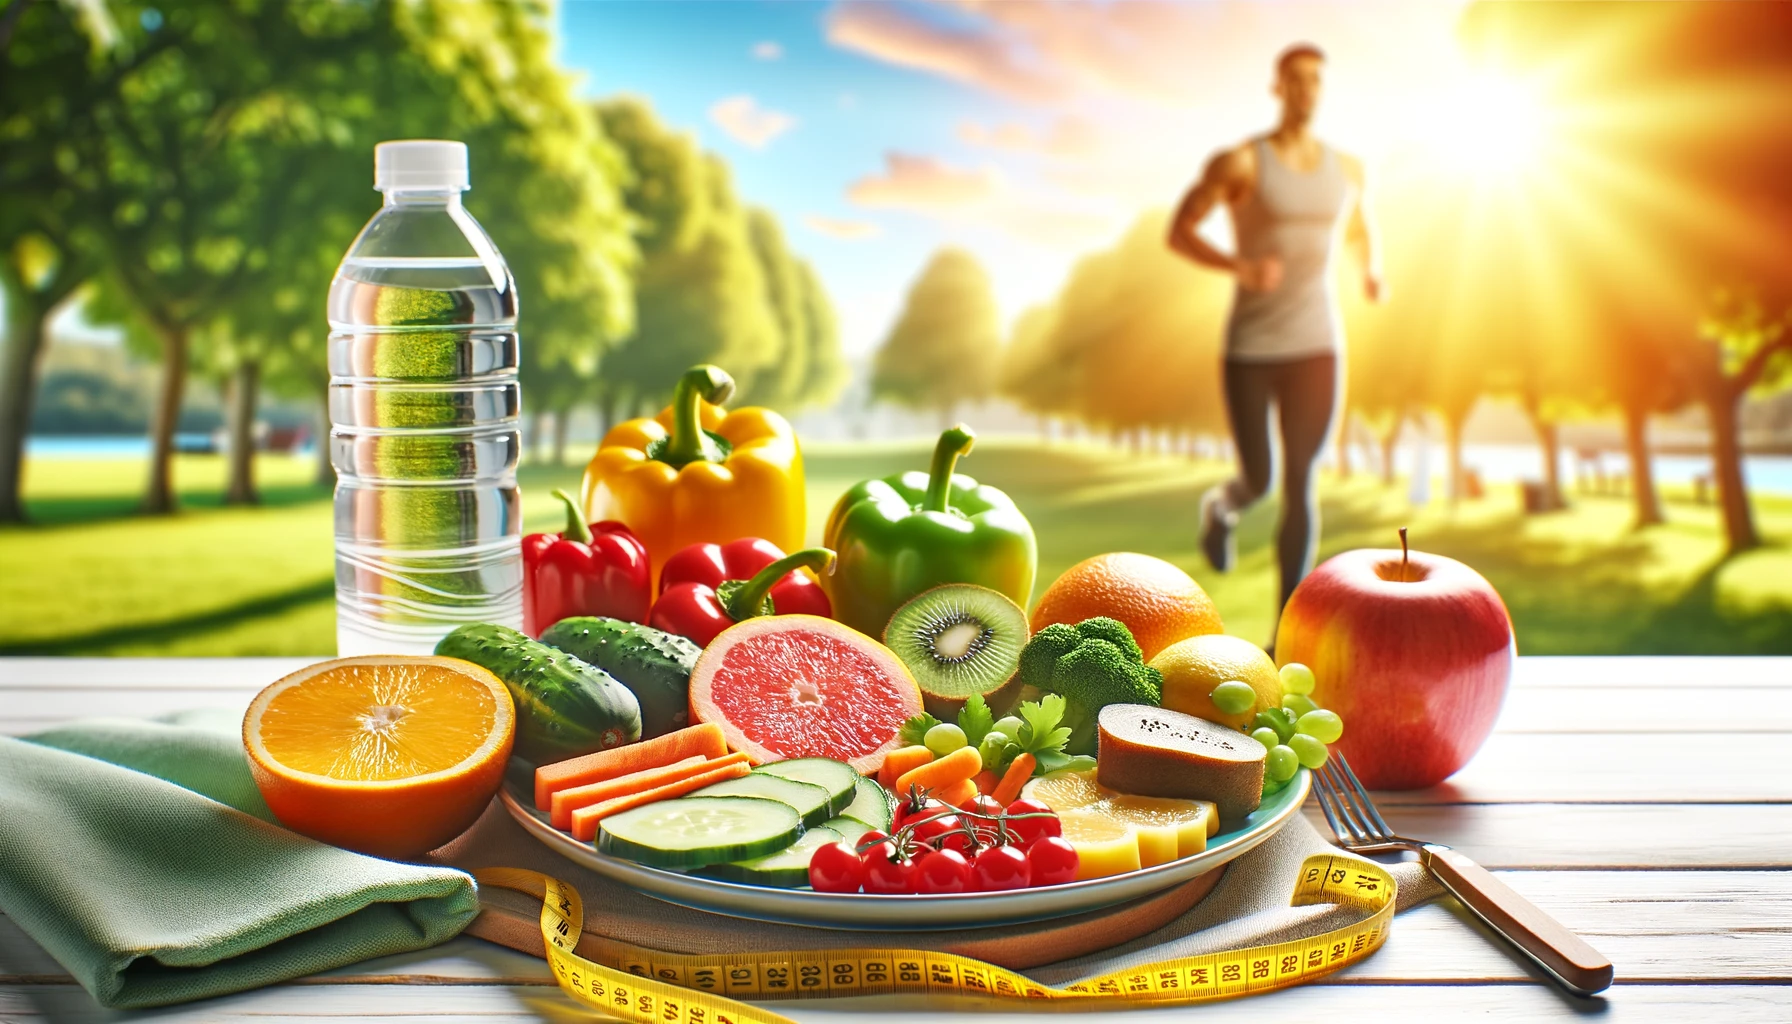 Balanced meal and jogging person in the background, symbolizing weight loss and healthy living on Healthy Life - New Start blog